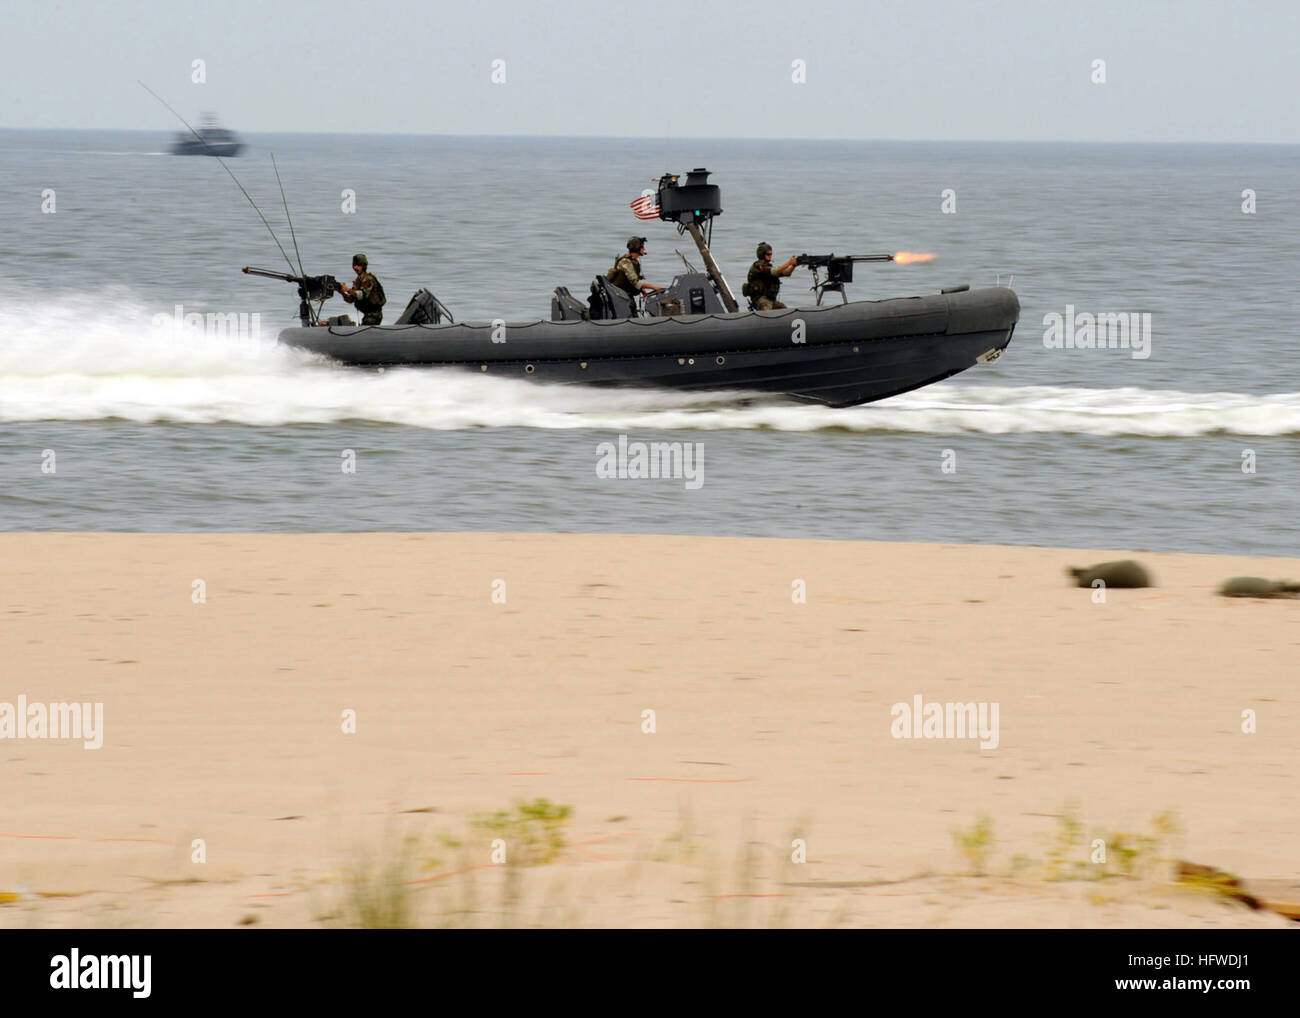 100717-N-8949D-327 VIRGINIA BEACH, Va. (July 17, 2010) Special Warfare Combatant-craft Crewmen assigned to Special Boat Team (SBT) 20 perform a capability demonstration at Joint Expeditionary Base Little Creek-Fort Story. The Naval Special Warfare community displayed its capabilities as part of the 41st UDT-SEAL East Coast Reunion celebration. Events are planned throughout the weekend to honor UDT/SEAL history, heritage, and families. (U.S. Navy photo by Mass Communication Specialist 2nd Class Matt Daniels/Released) US Navy 100717-N-8949D-327 Special Warfare Combatant-craft Crewmen assigned to Stock Photo